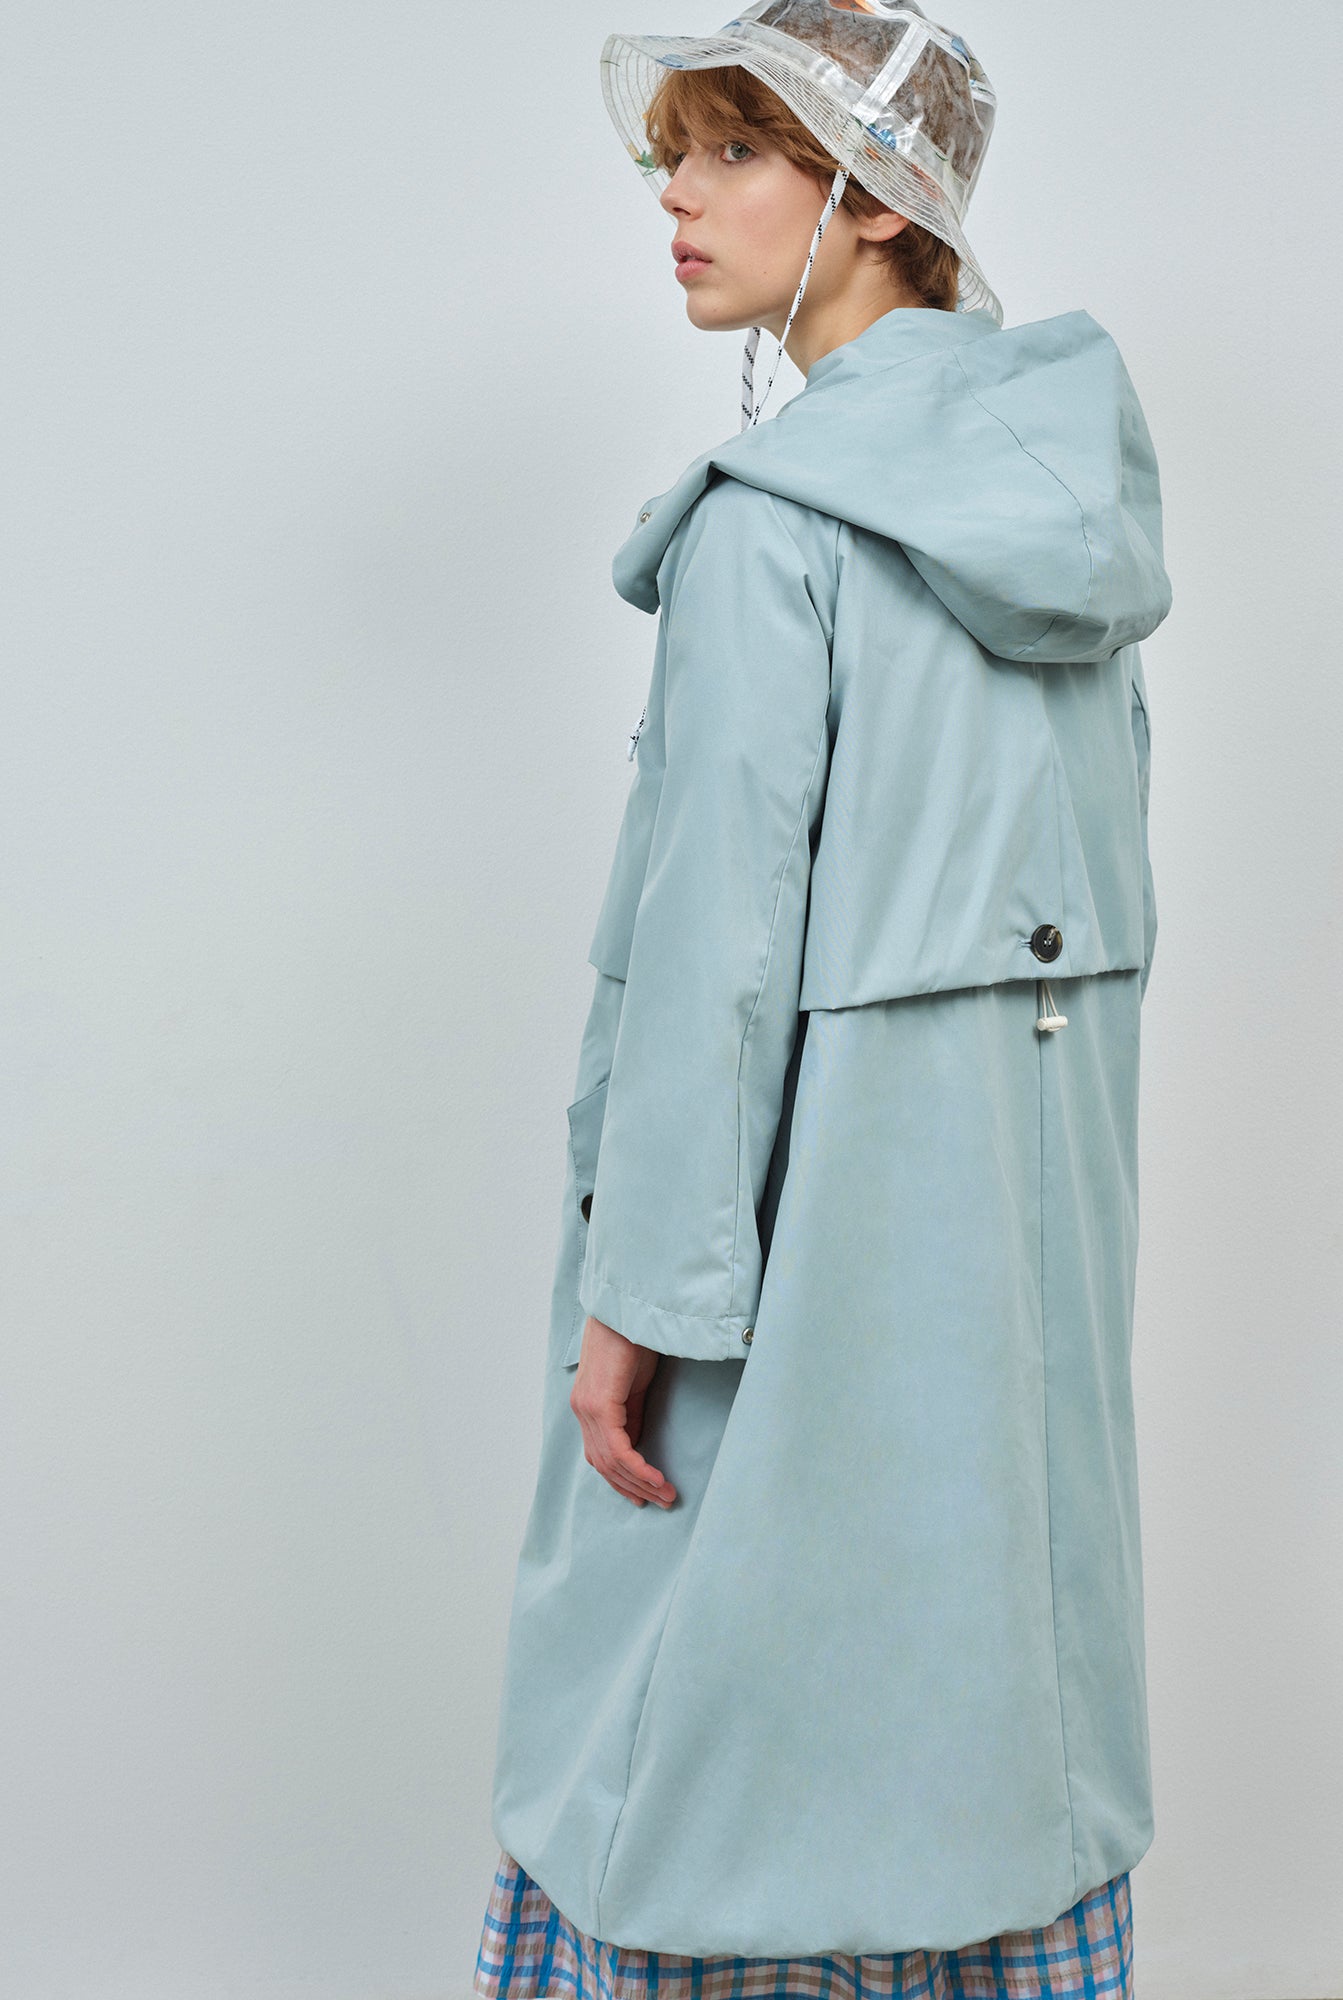 Kalmar Trench Coat by Embassy of Bricks and Logs